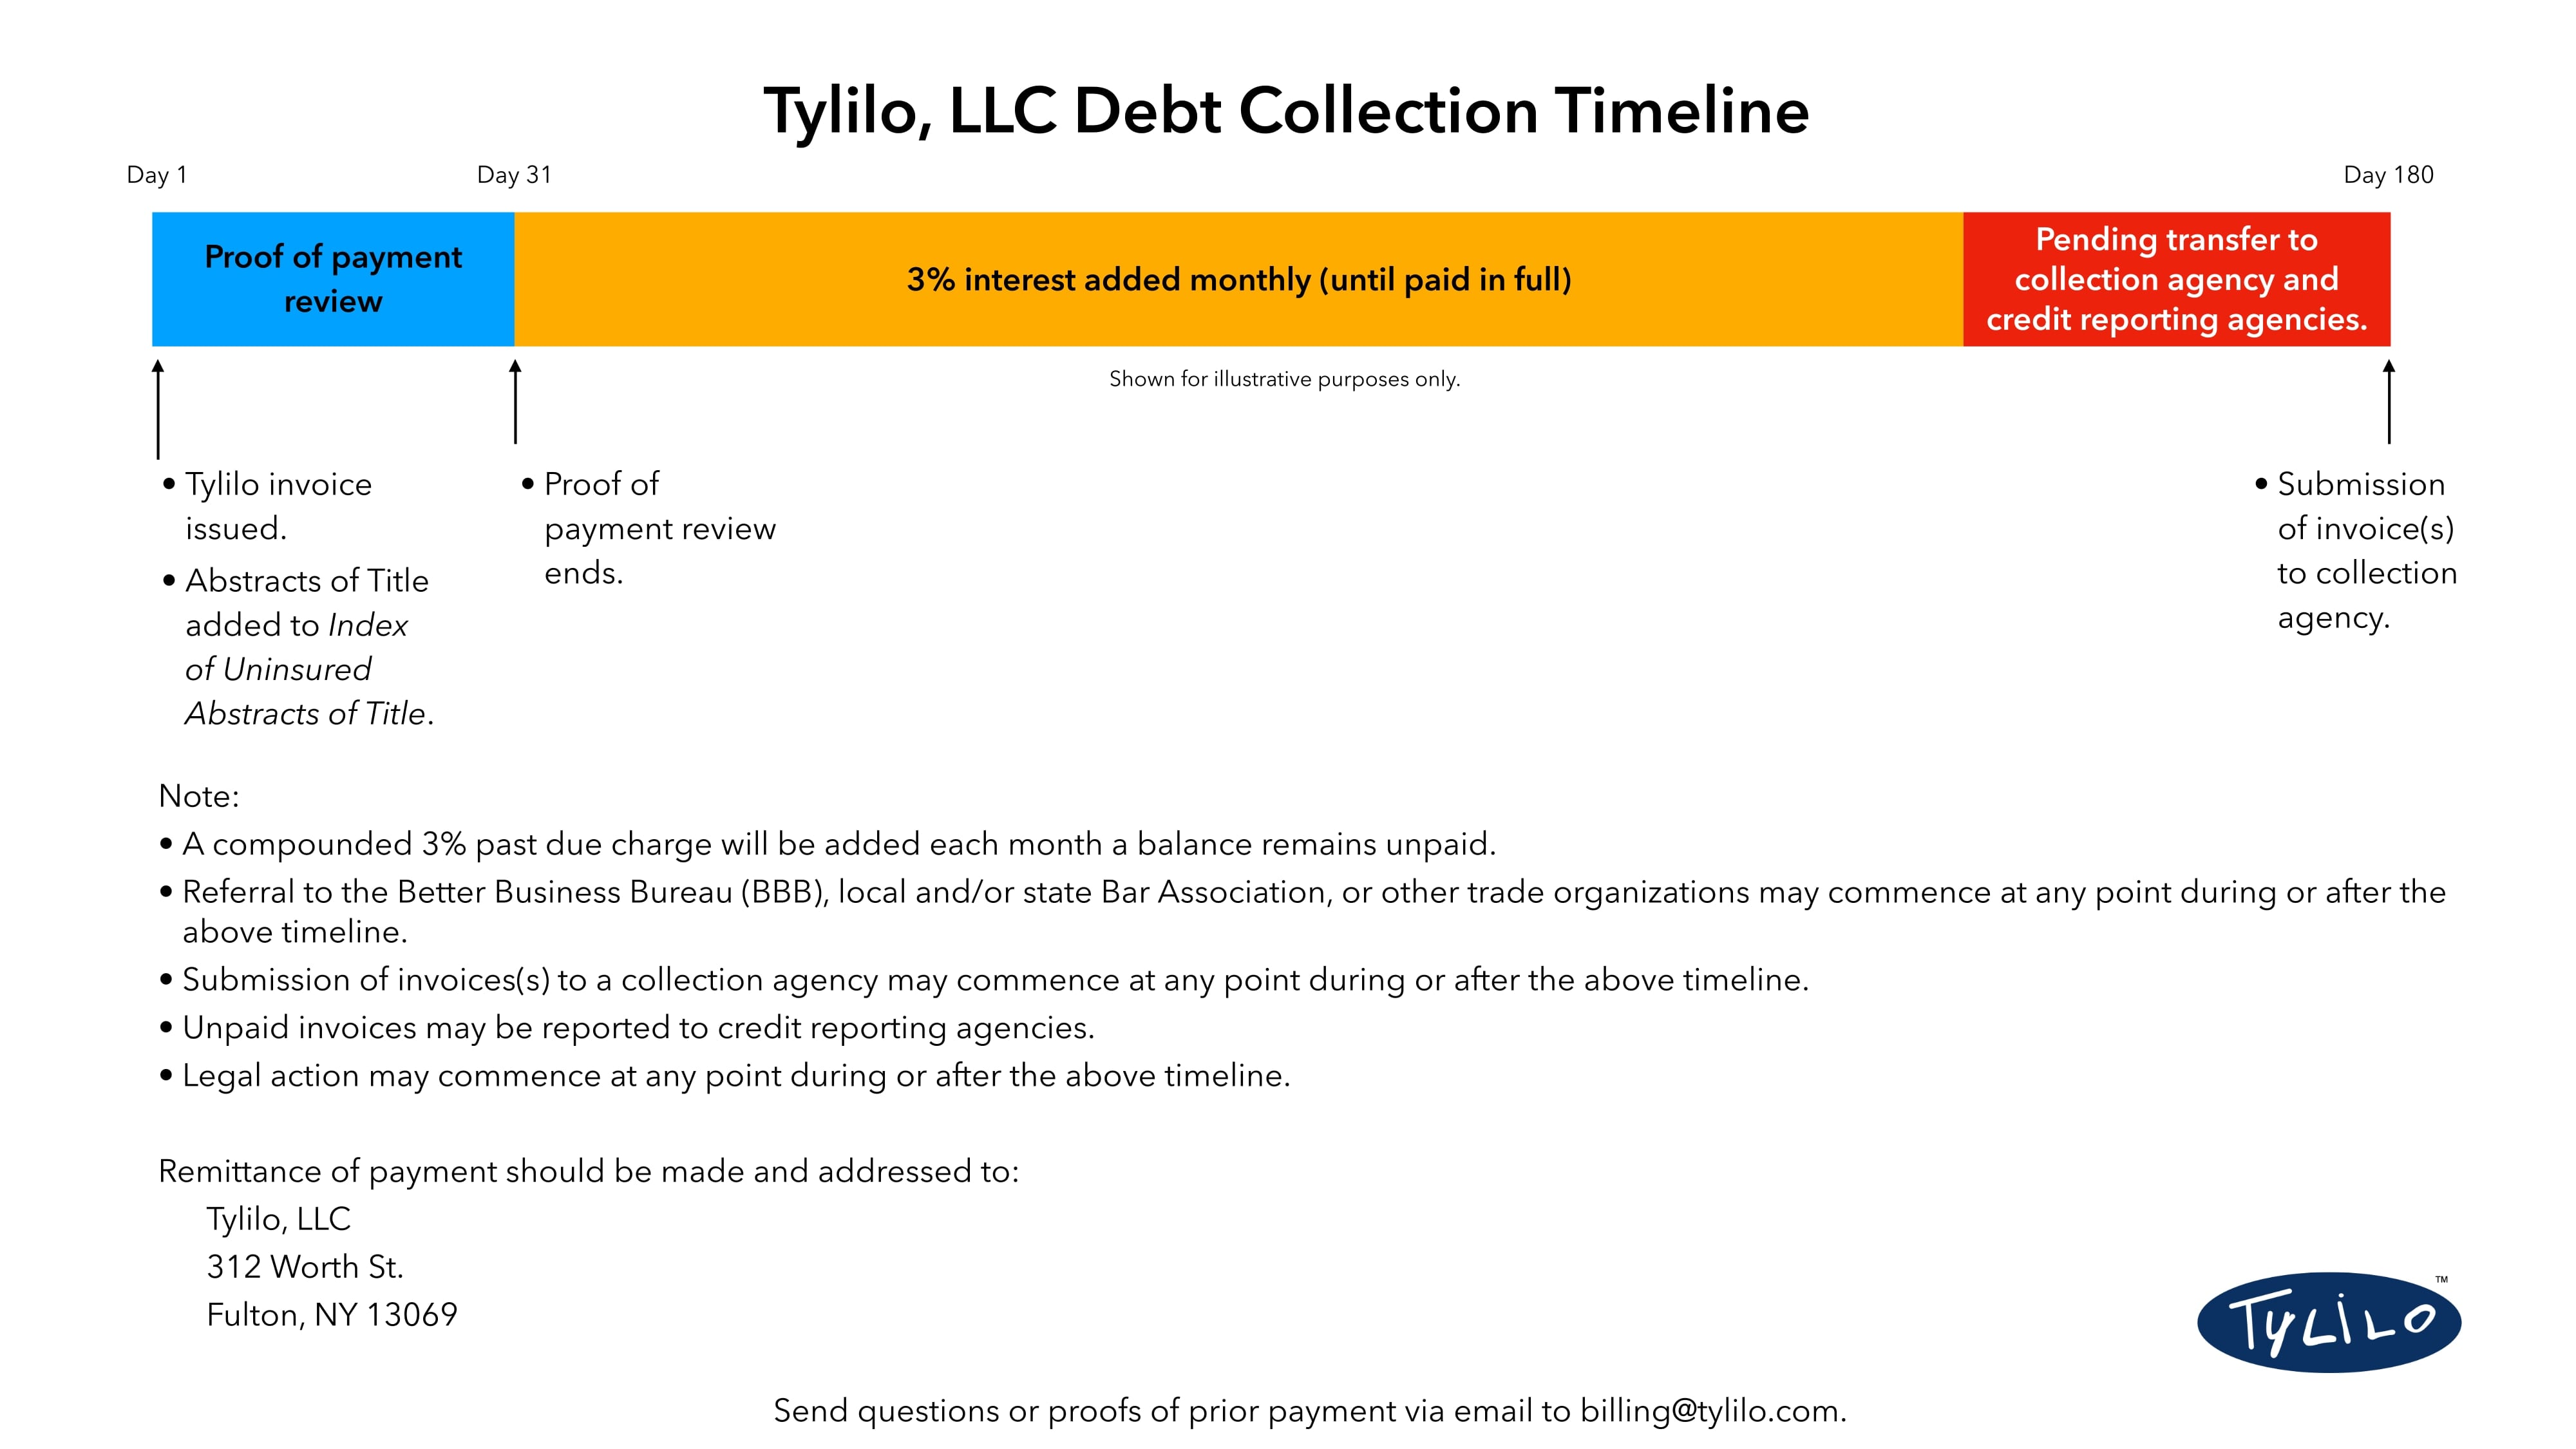 Debt Collection Timeline Graphic